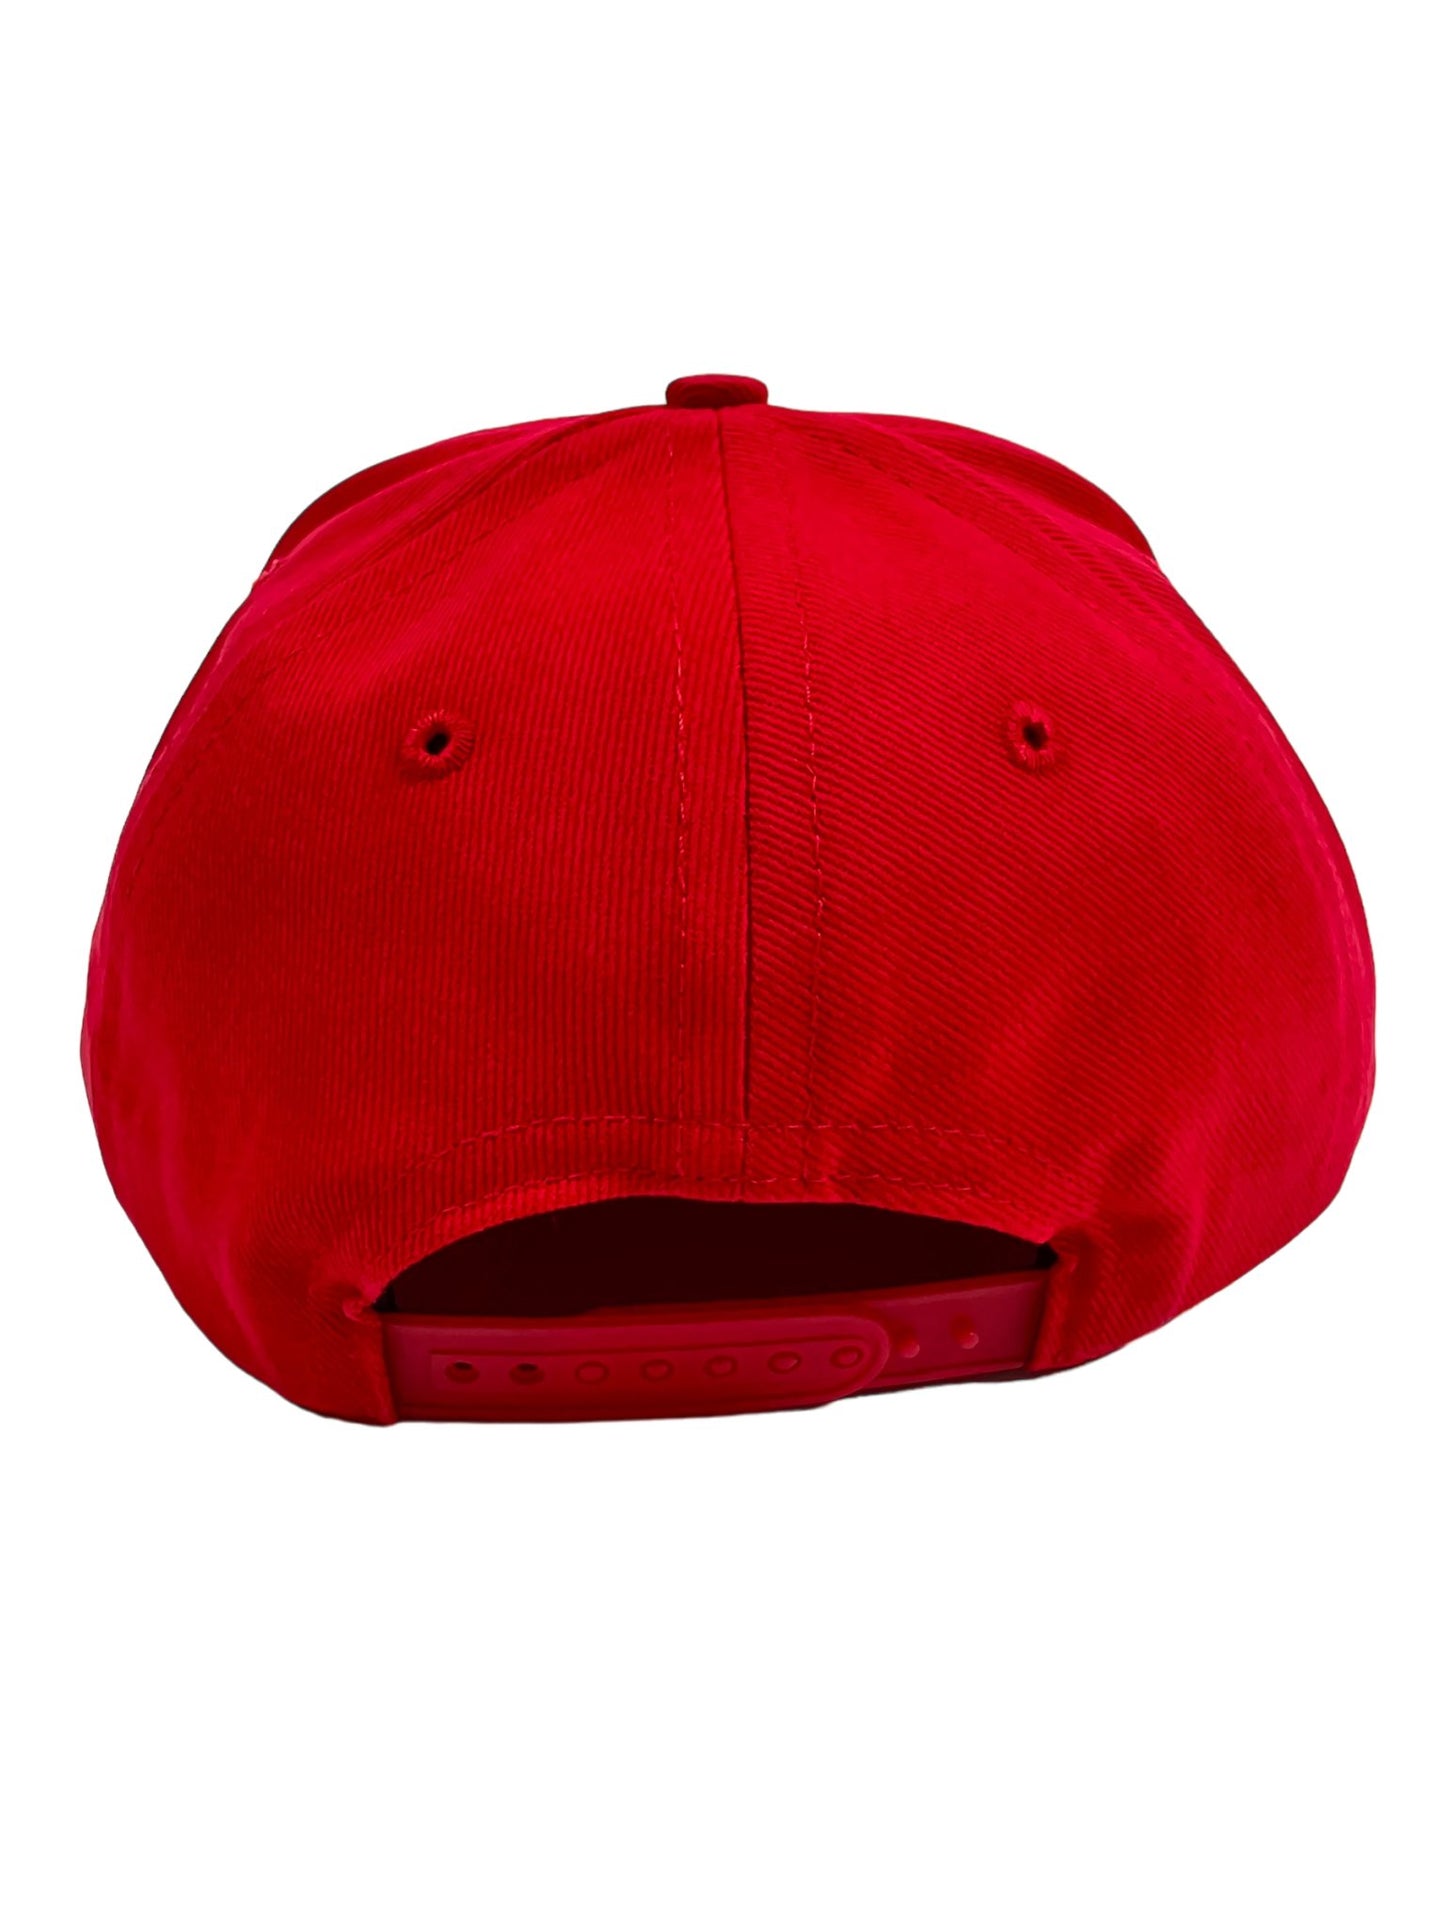 Rear view of a RHUDE RIVIERA SAILING HAT RED heavyweight cotton hat with an adjustable snap back on a black background.